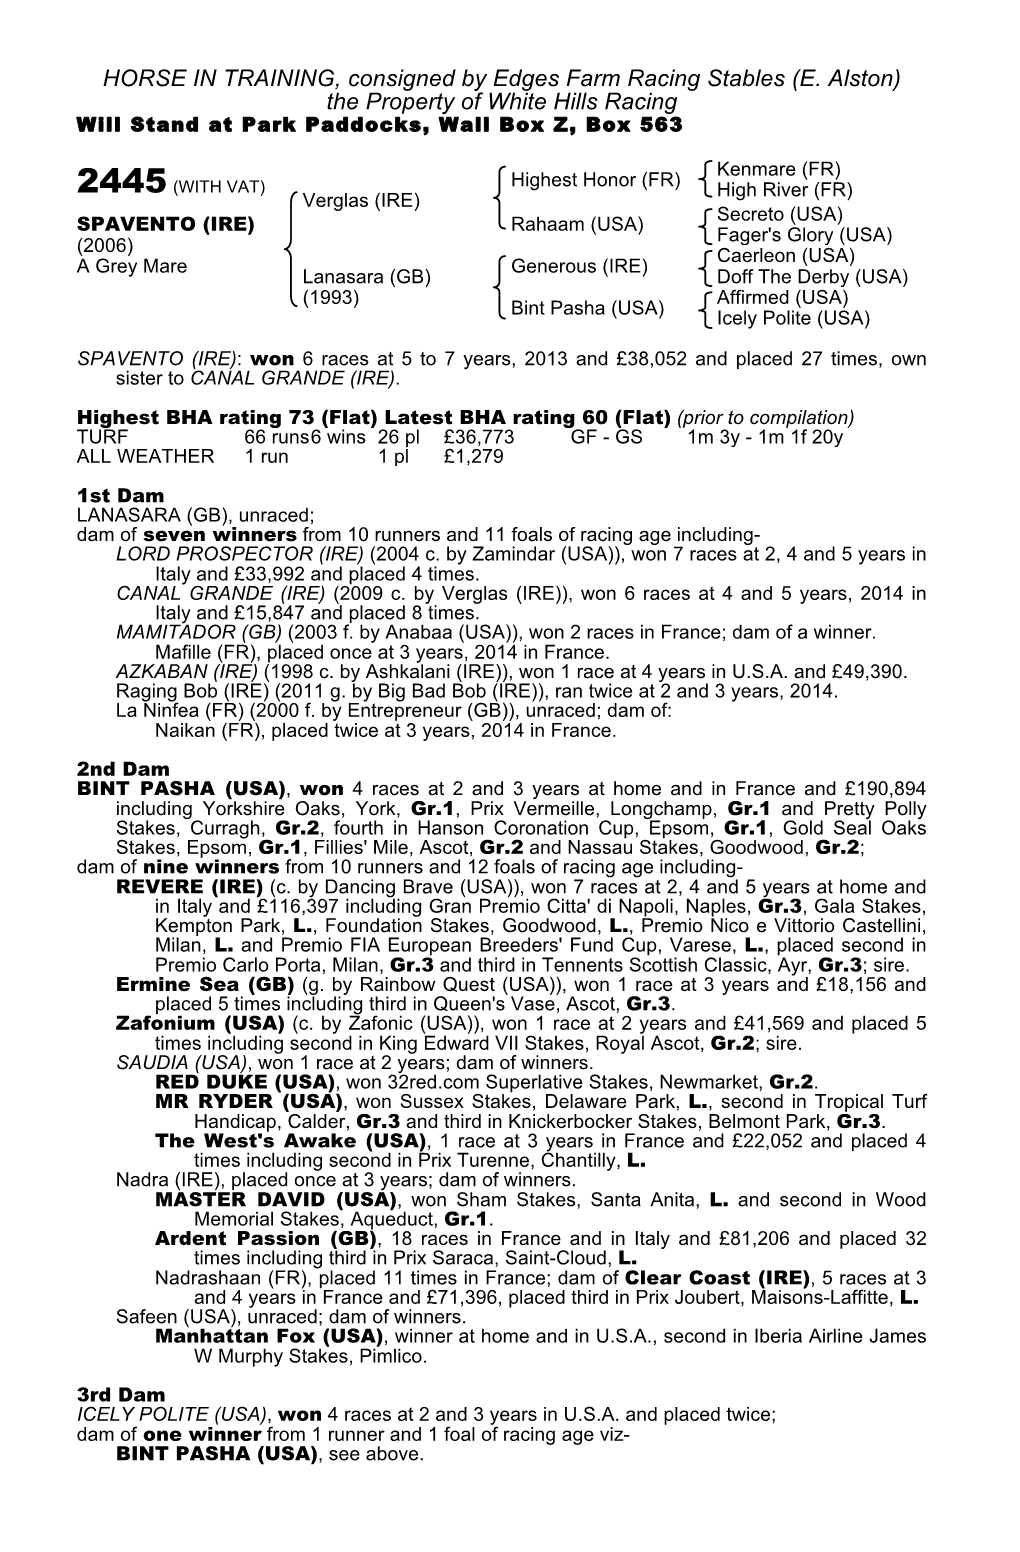 (E. Alston) the Property of White Hills Racing Will Stand at Park Paddocks, Wall Box Z, Box 563